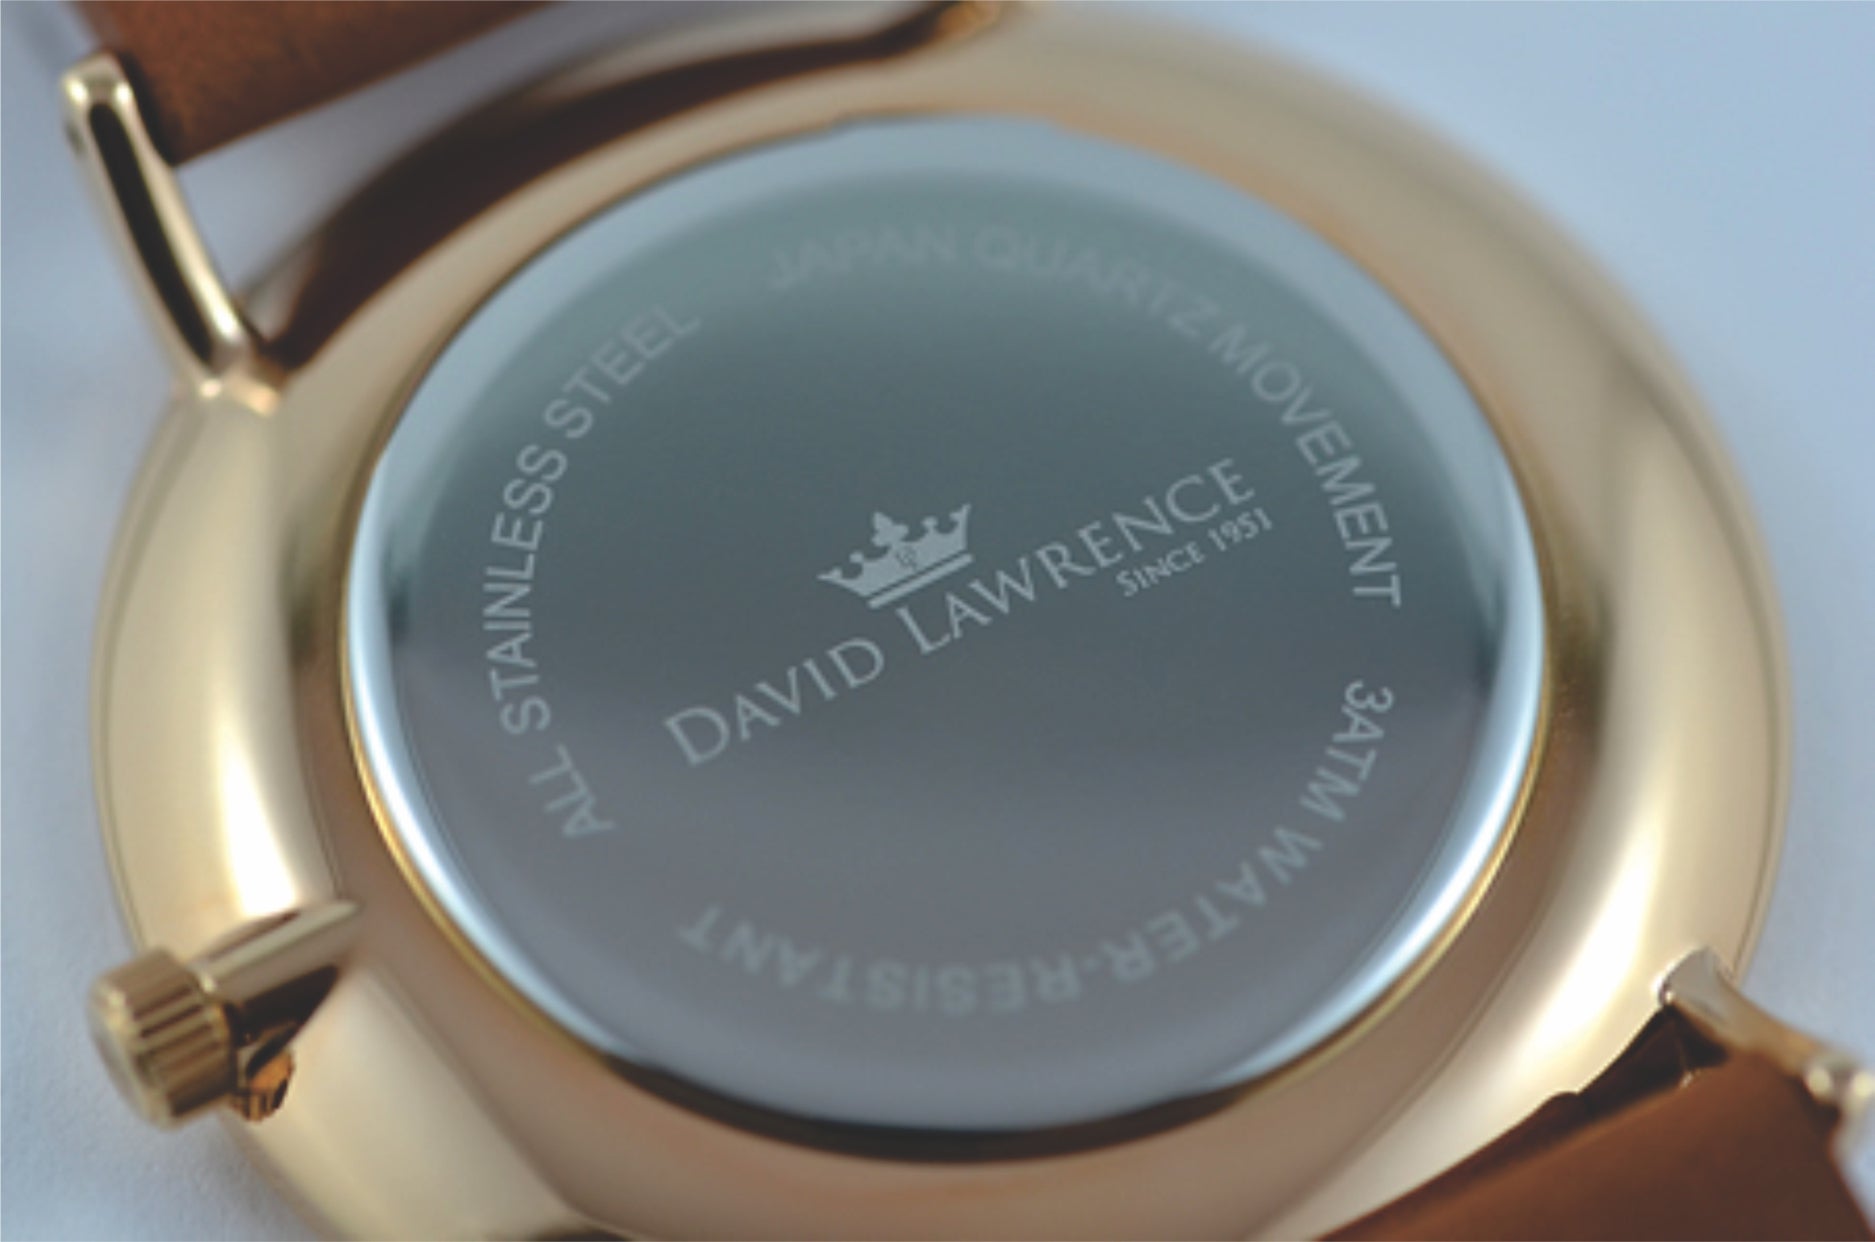 OXFORD 46001-1 by David Lawrence Watches